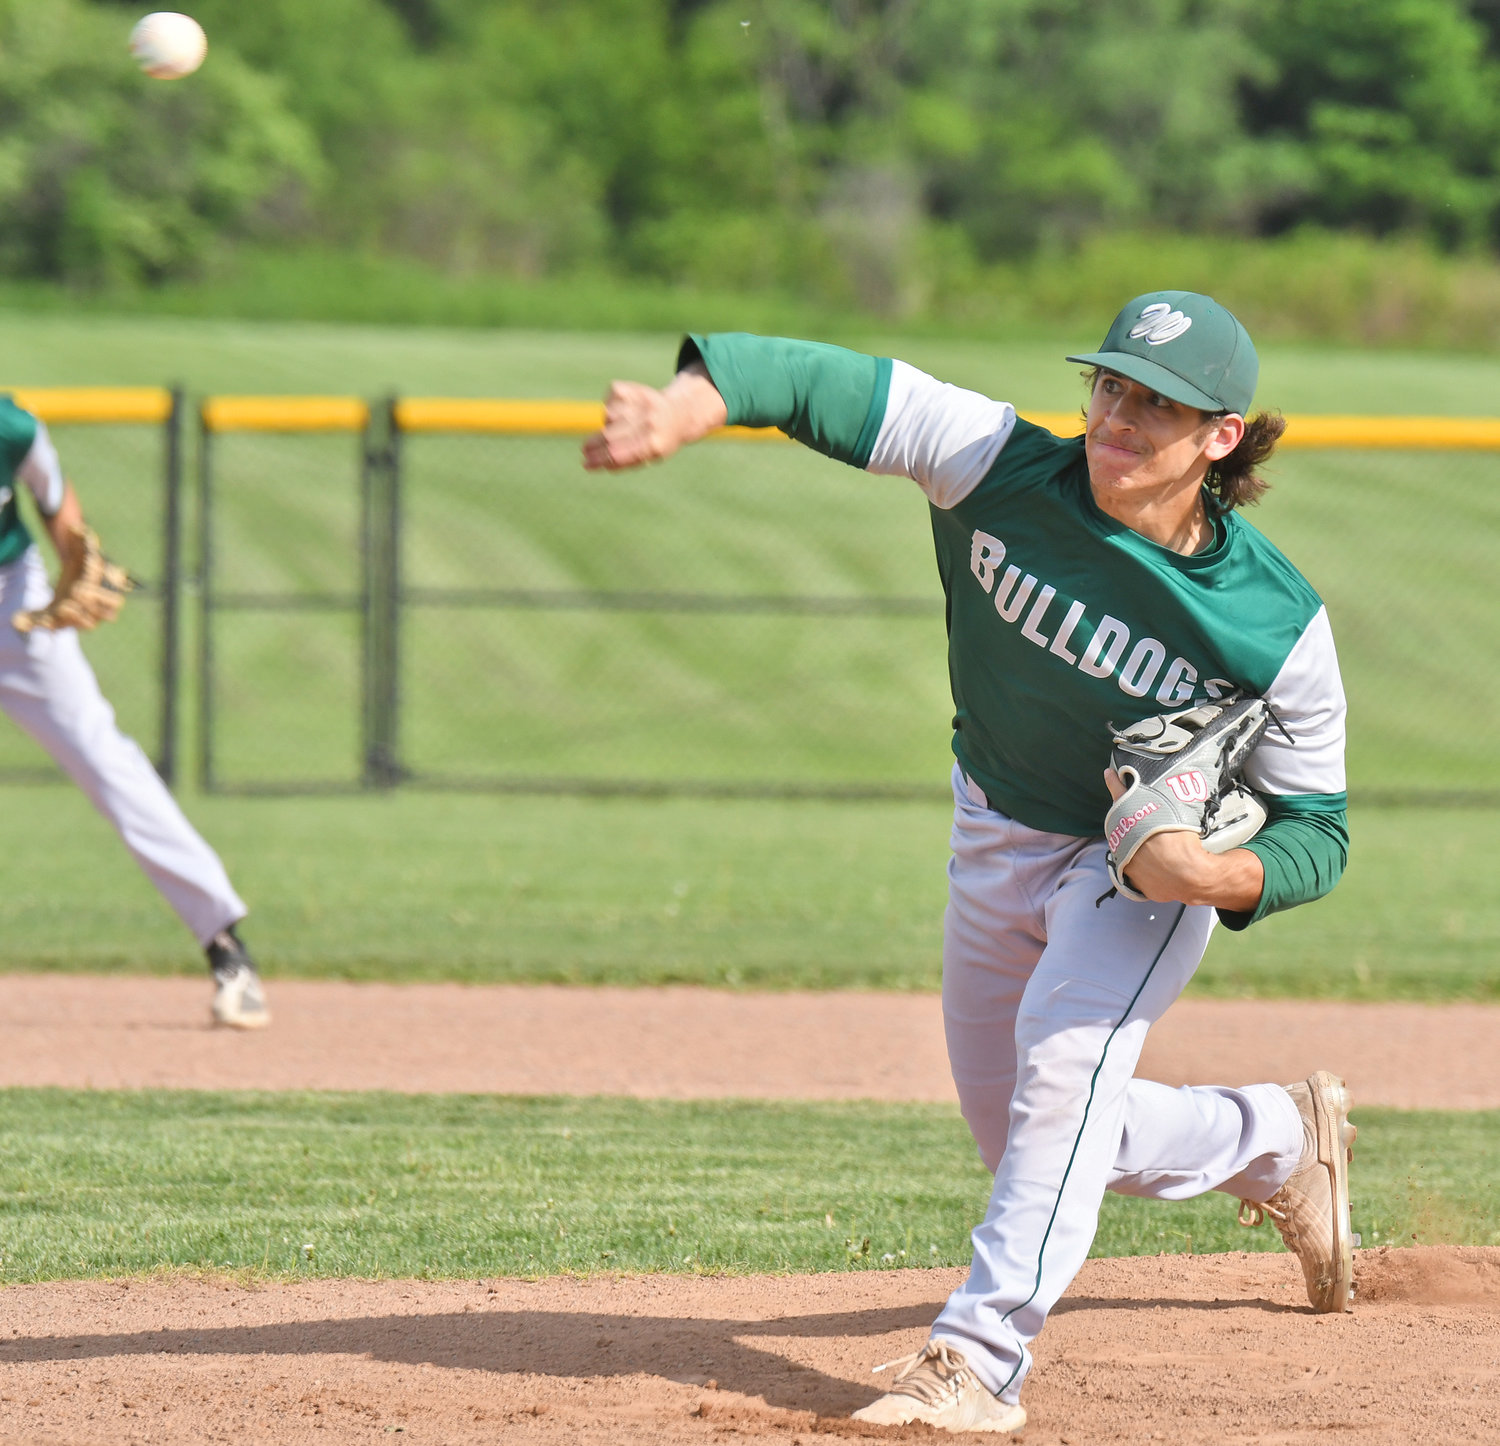 Westmoreland’s Caleb Miller delivers a pitch in the first inning of Tuesday’s 18-1 win at home against Alexandria in the second round of the Section III Class C postseason. Miller earned the win as the top-seeded Bulldogs remained unbeaten this season.